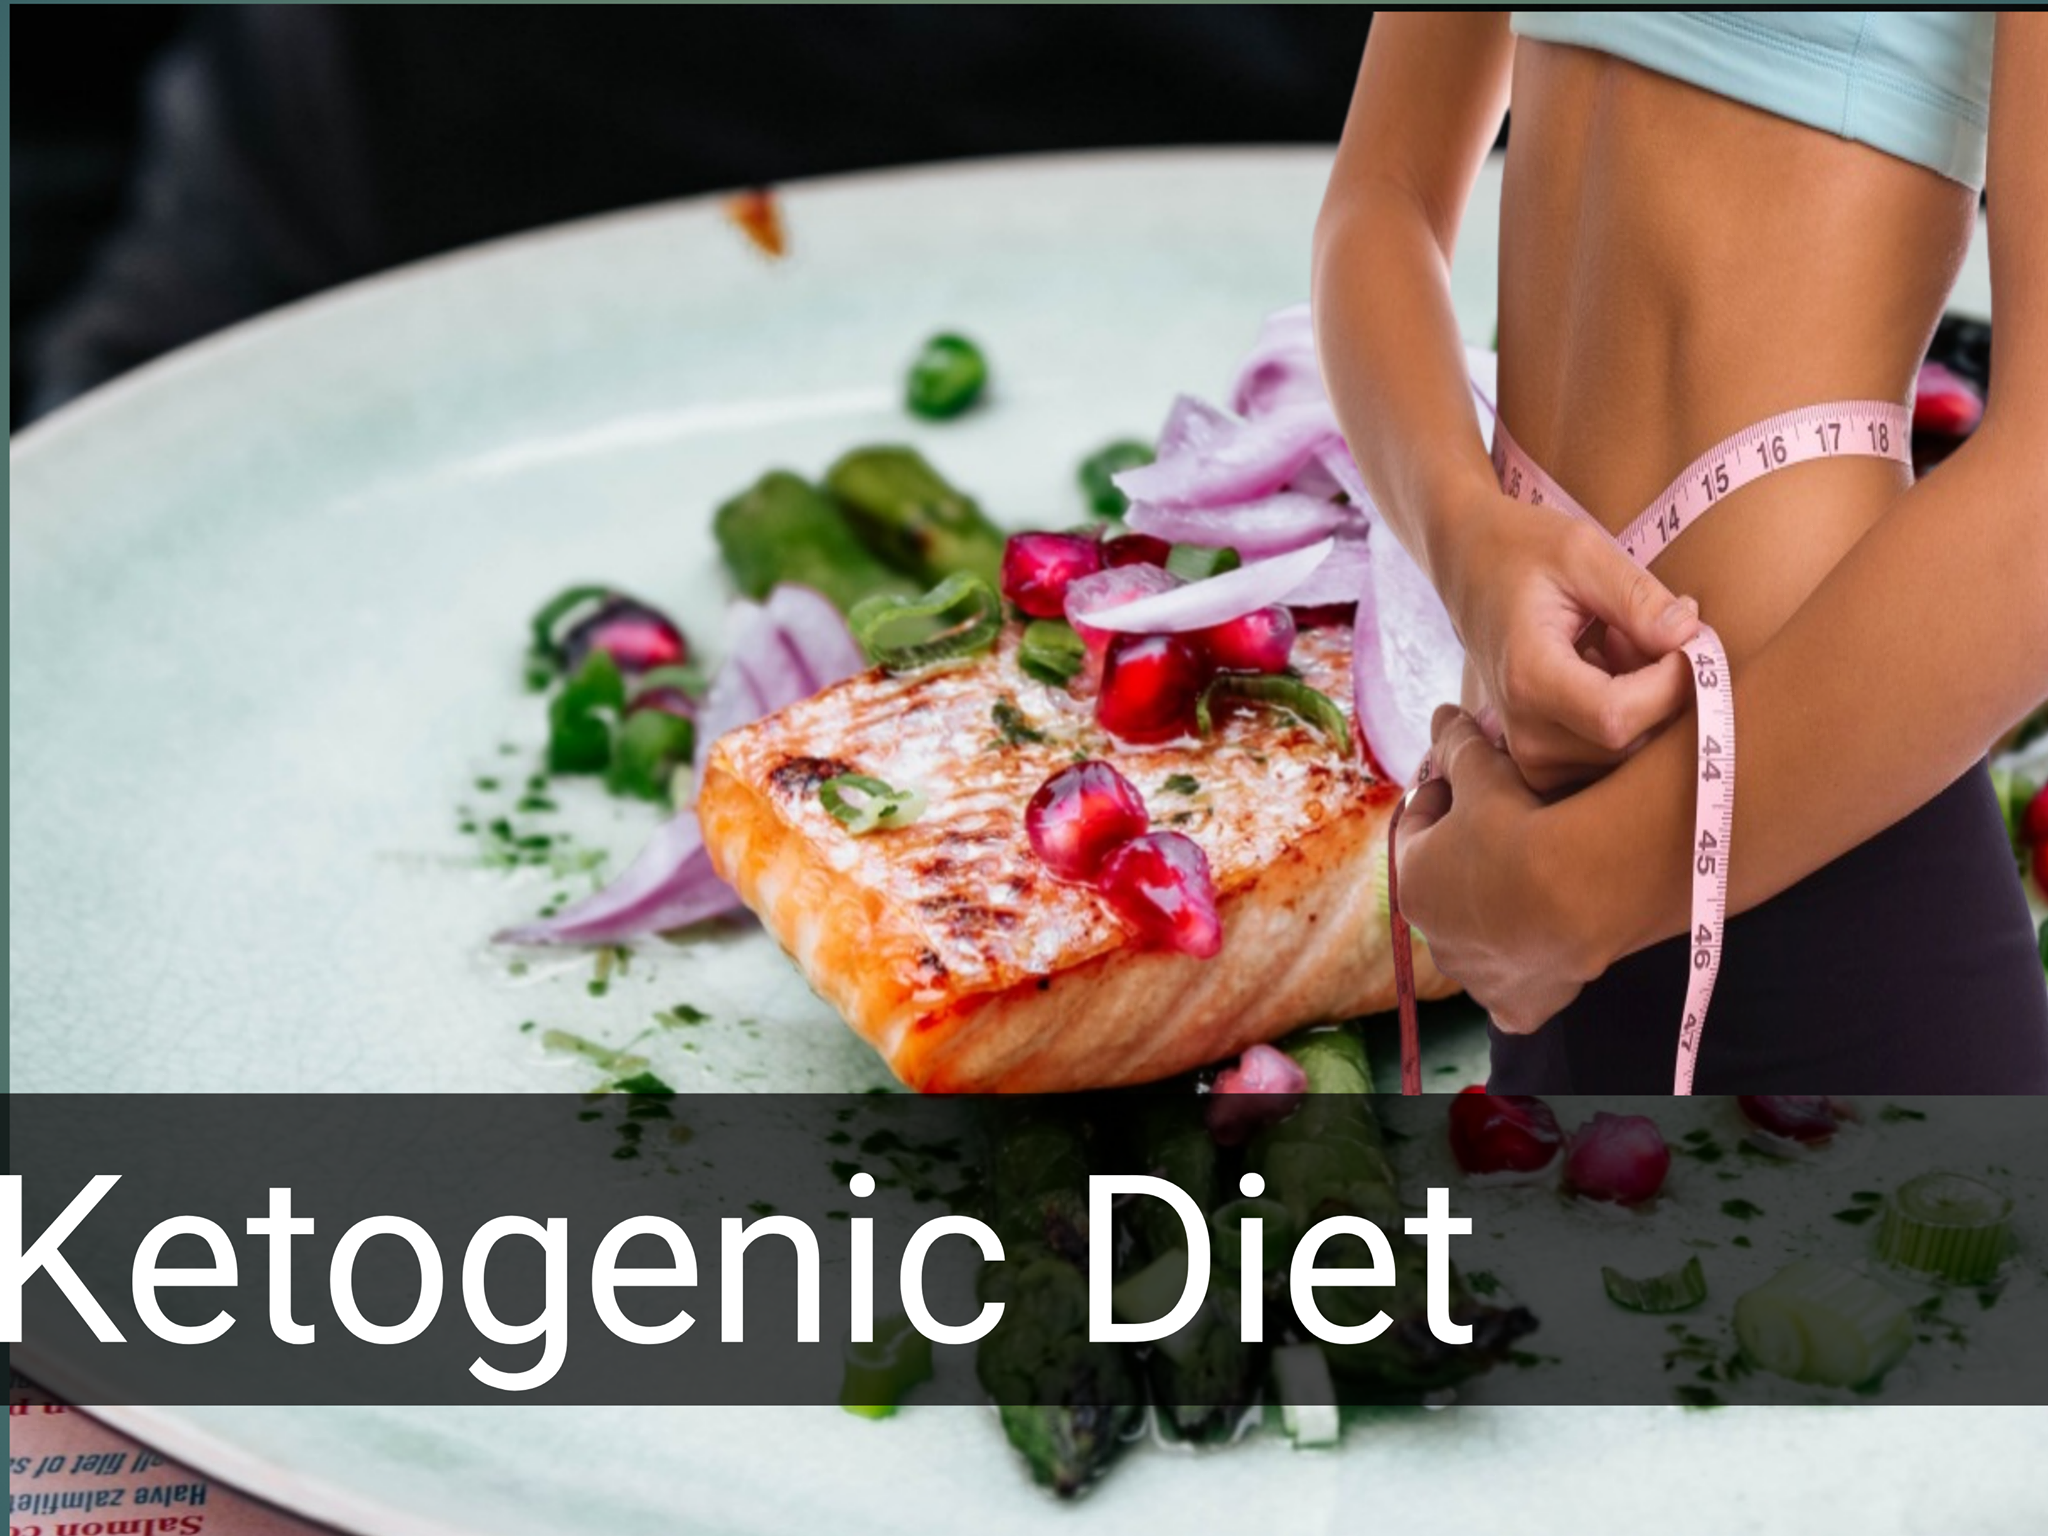 Ketogenic Diet: a way to reduce weight & utilize body fats